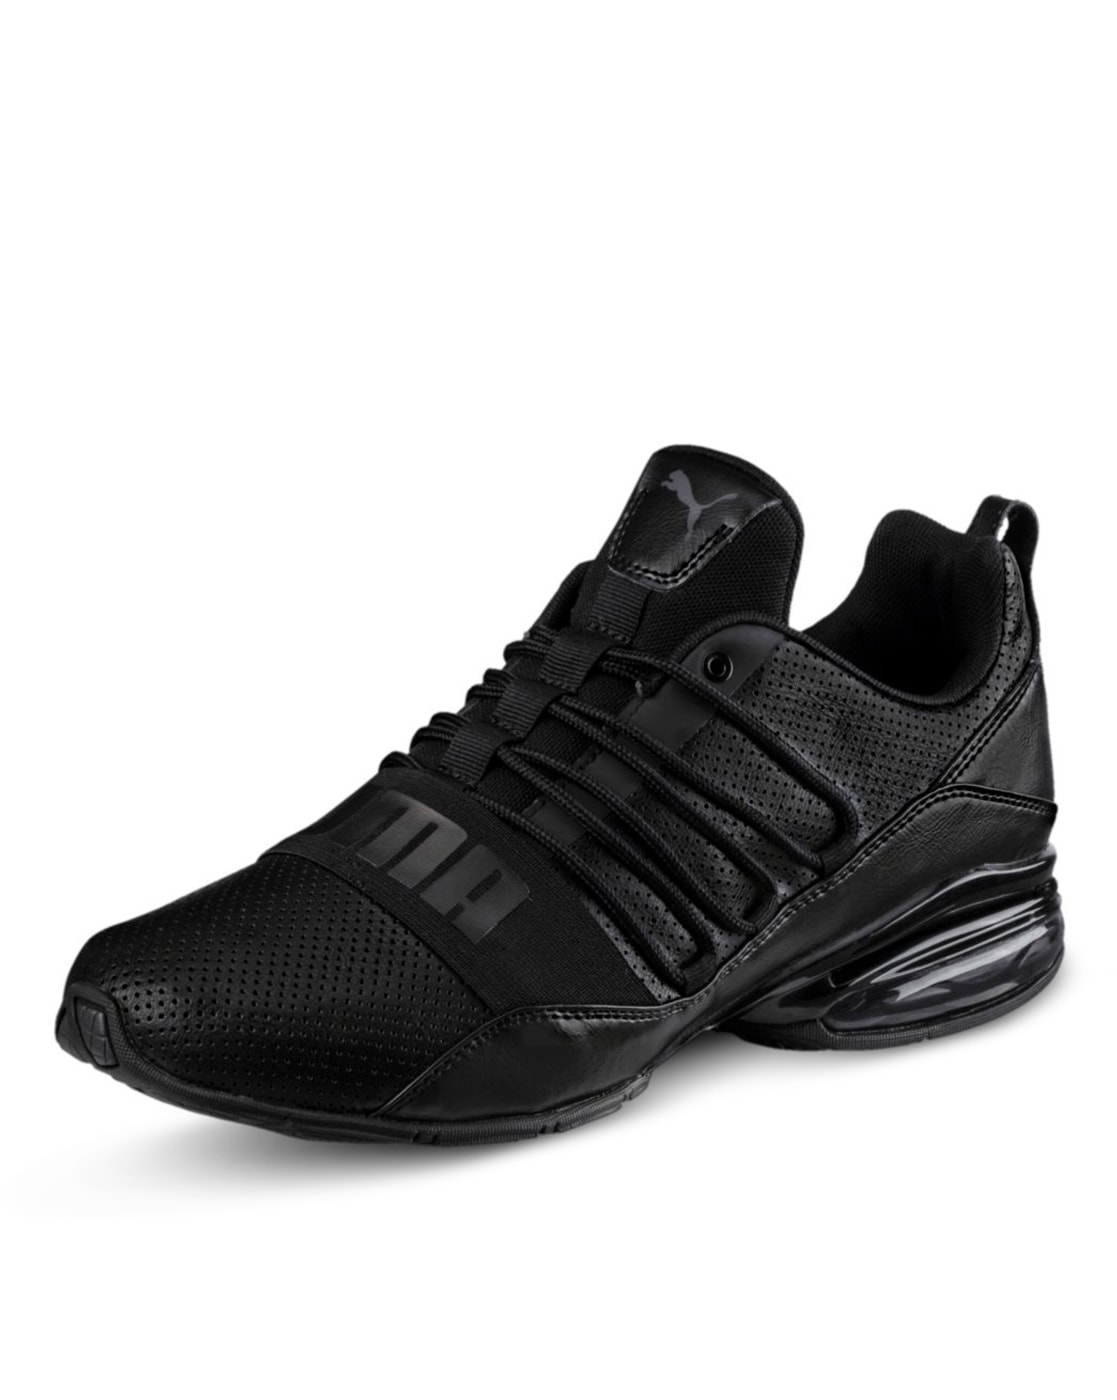 RedTape Men's Black Sports Shoes | Comfortable, Breathable, Arch Support &  Shock Absorbant | RMW0241